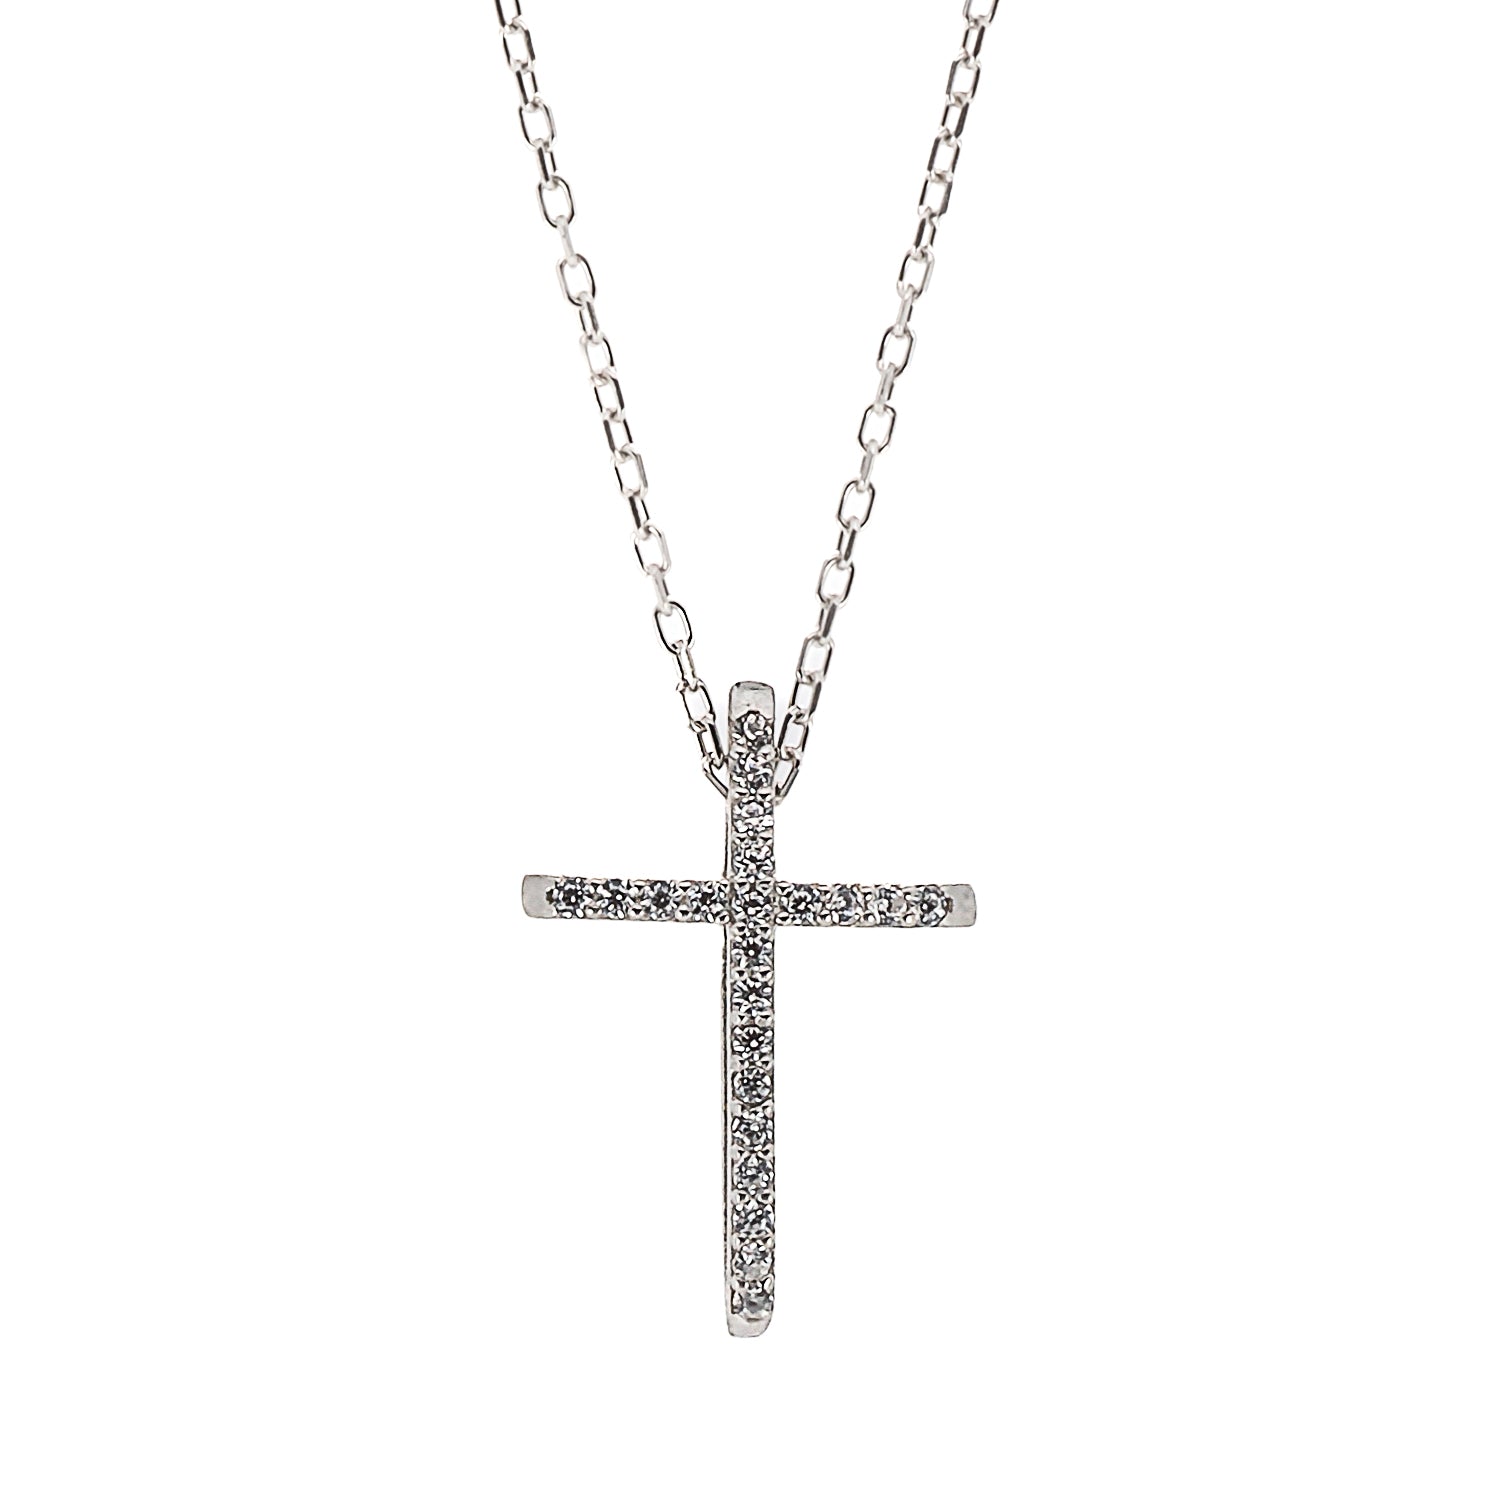 At the heart of this necklace is a remarkable cross pendant, expertly designed to showcase its uniqueness. 